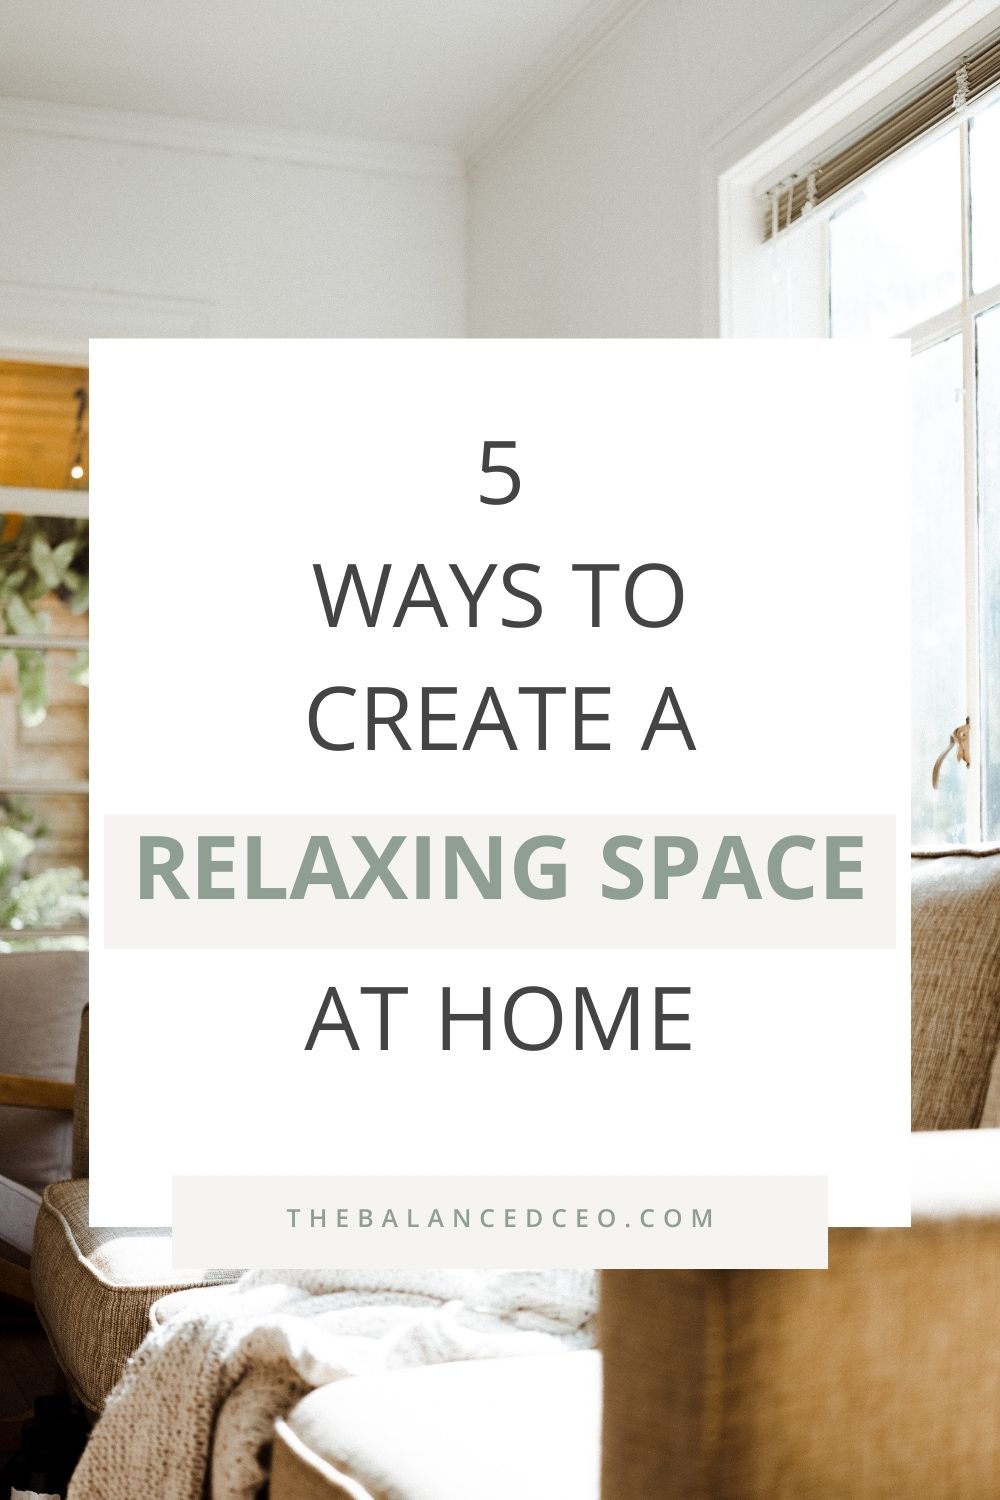 5 Ways to Create a Relaxing Space at Home